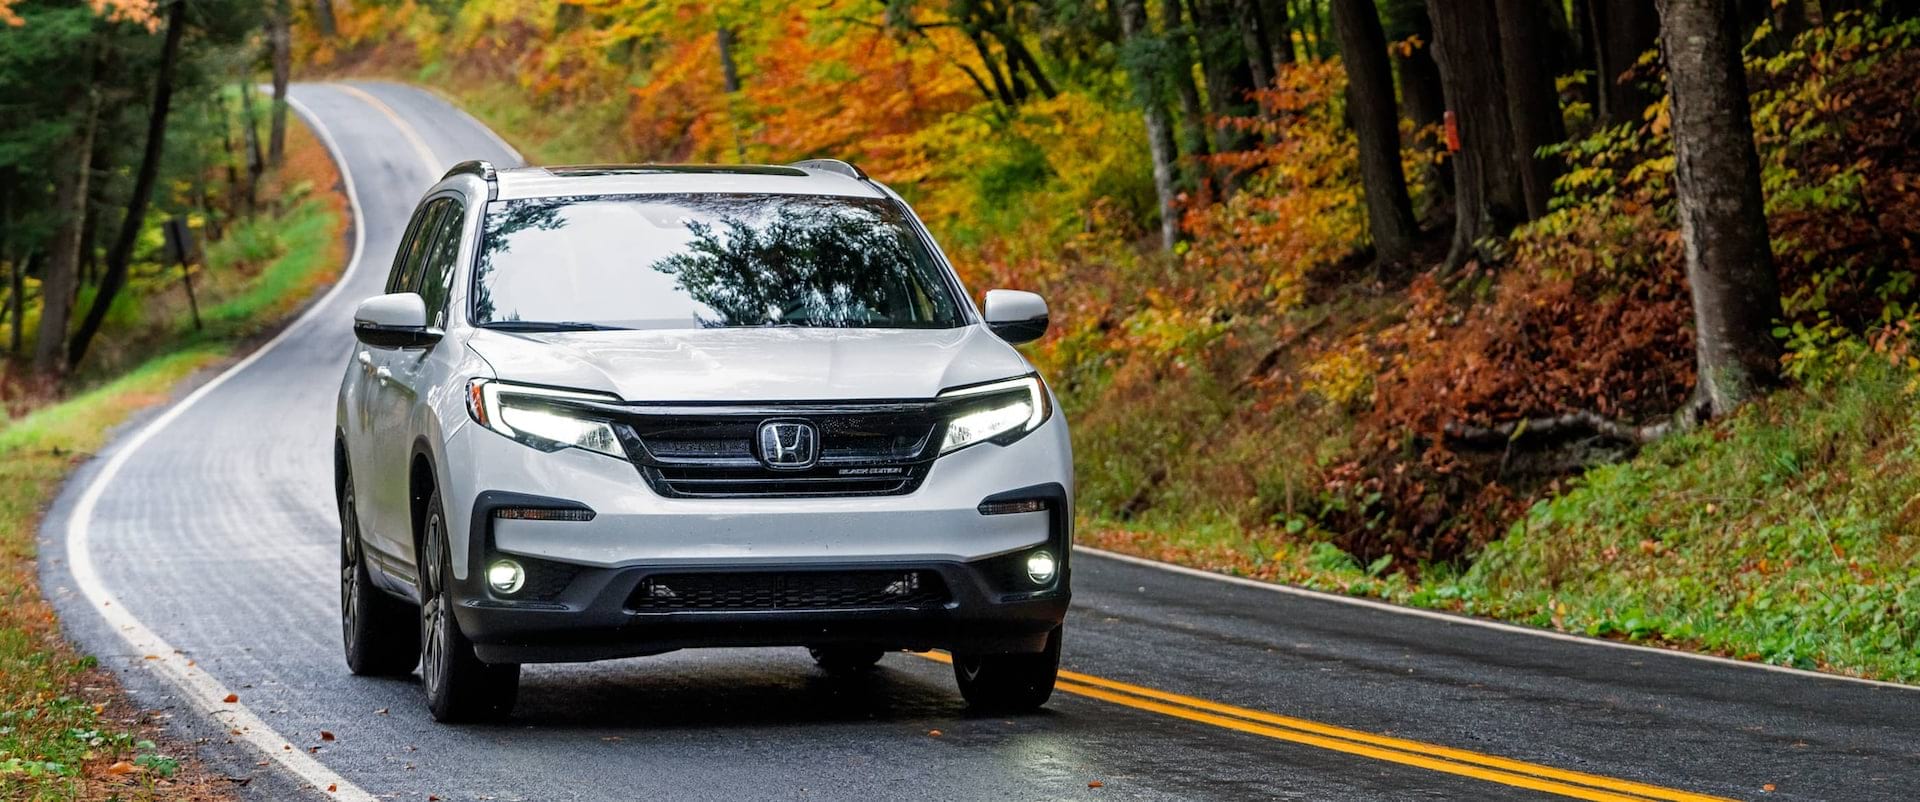 White 2021 Honda Pilot driving on street with fall leaves on trees in background